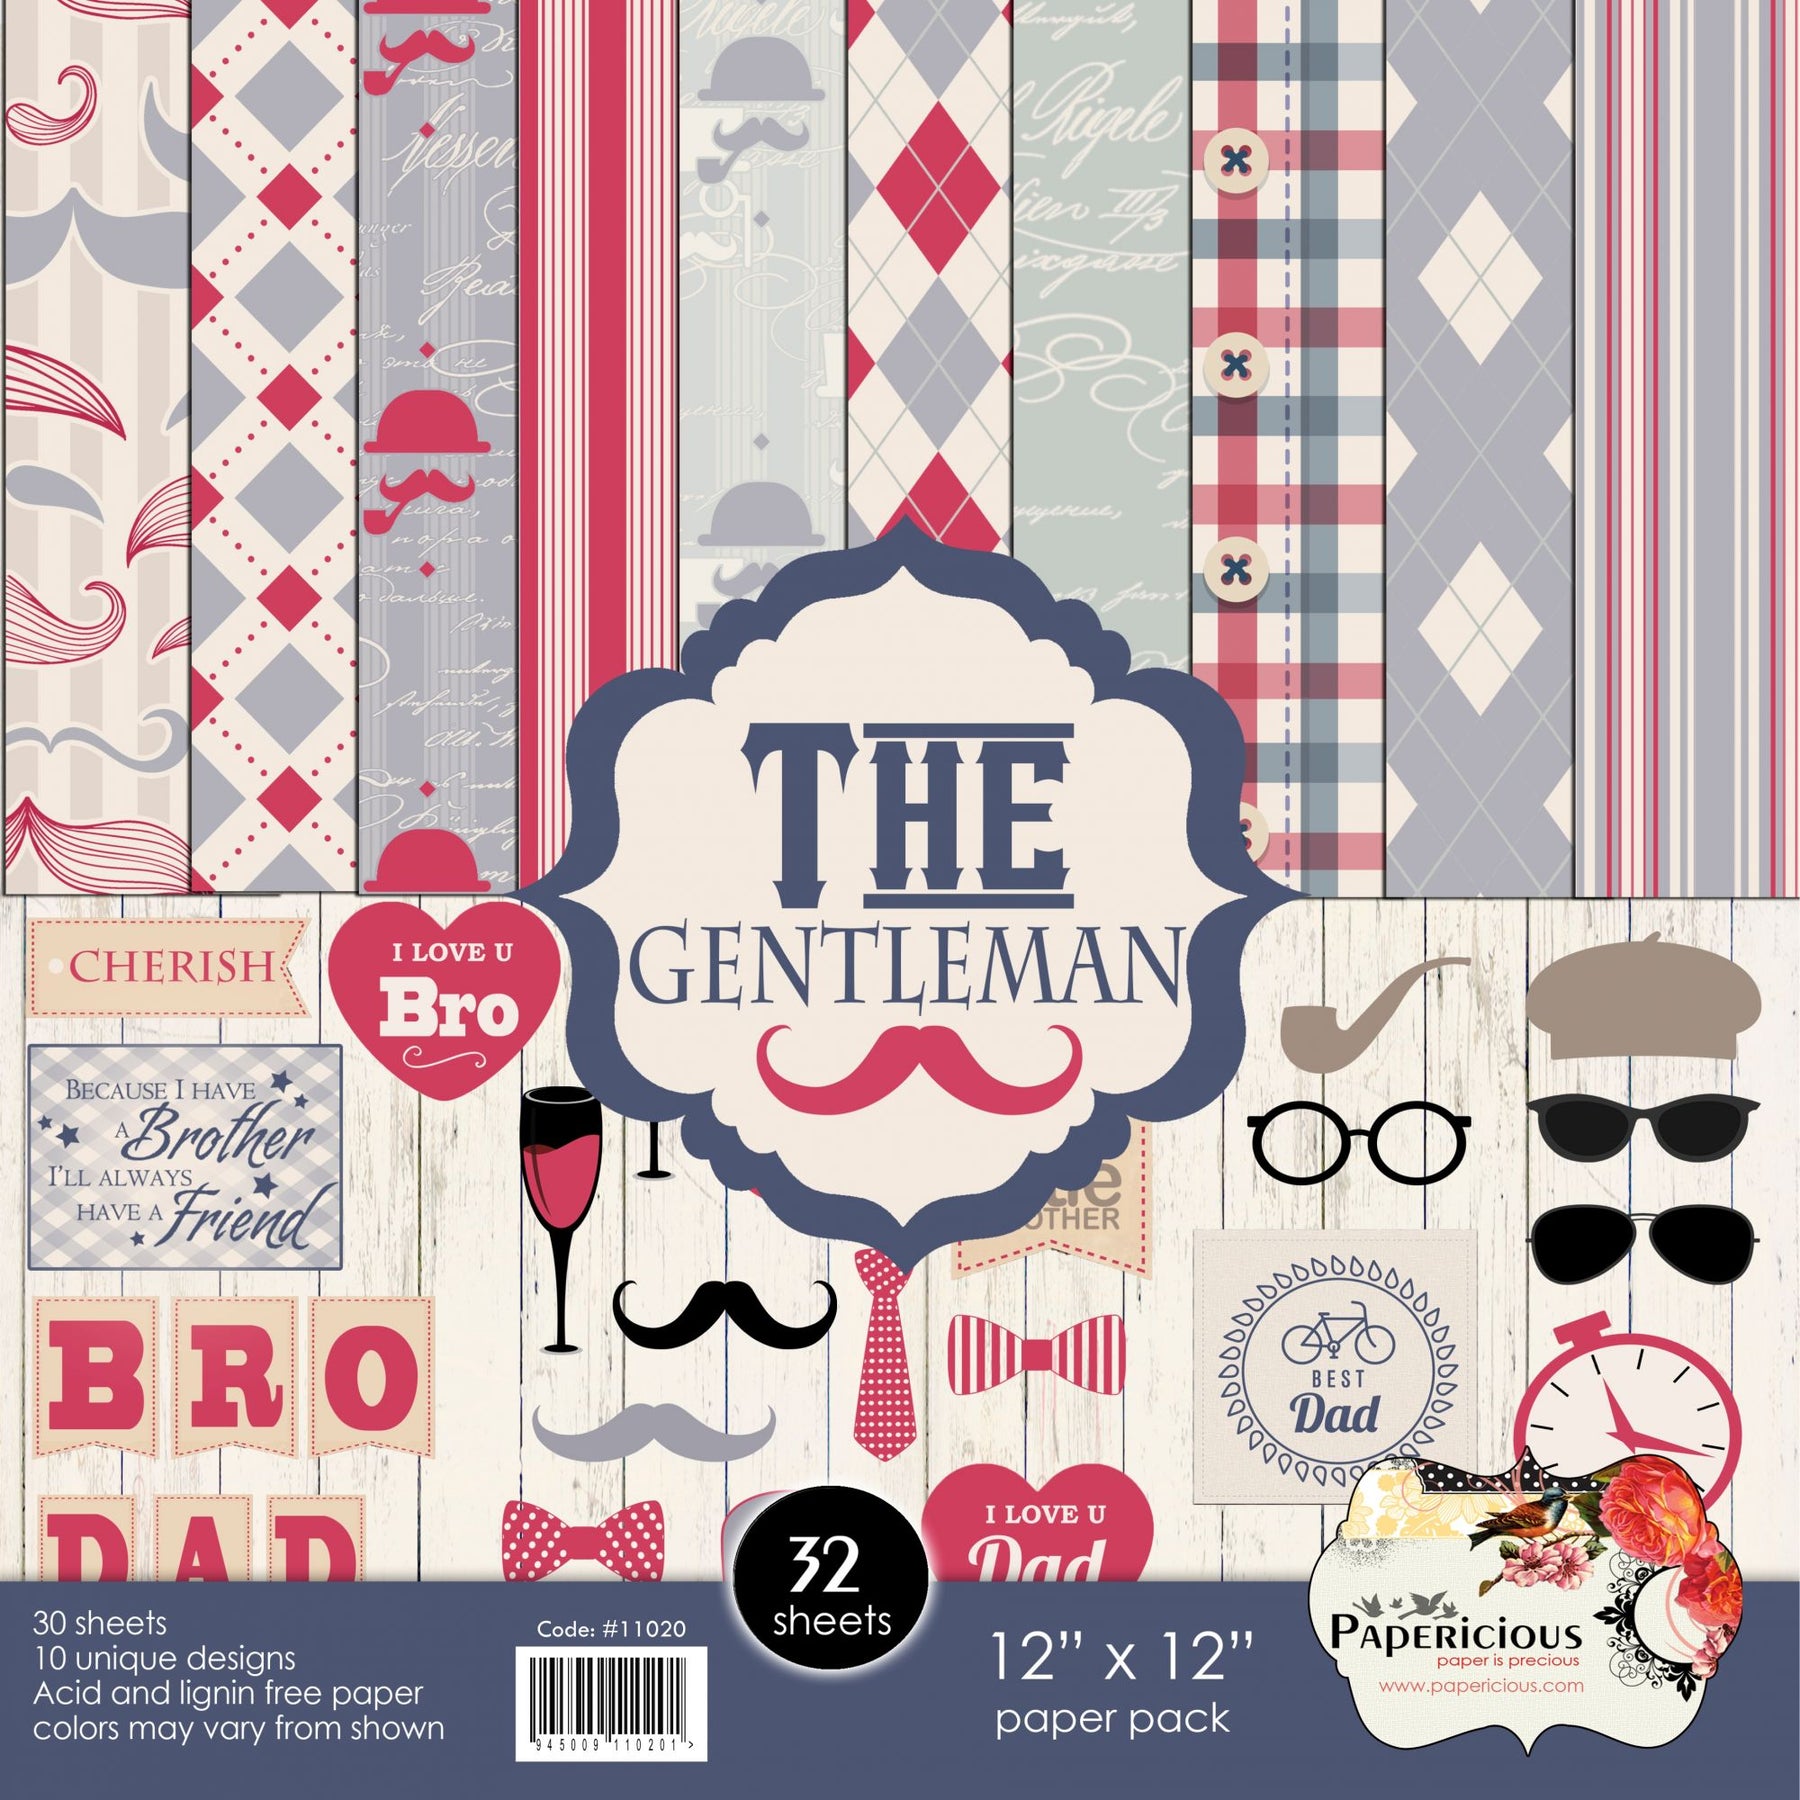 PAPERICIOUS - The Gentleman -  Designer Pattern Printed Scrapbook Papers  / 32 sheets